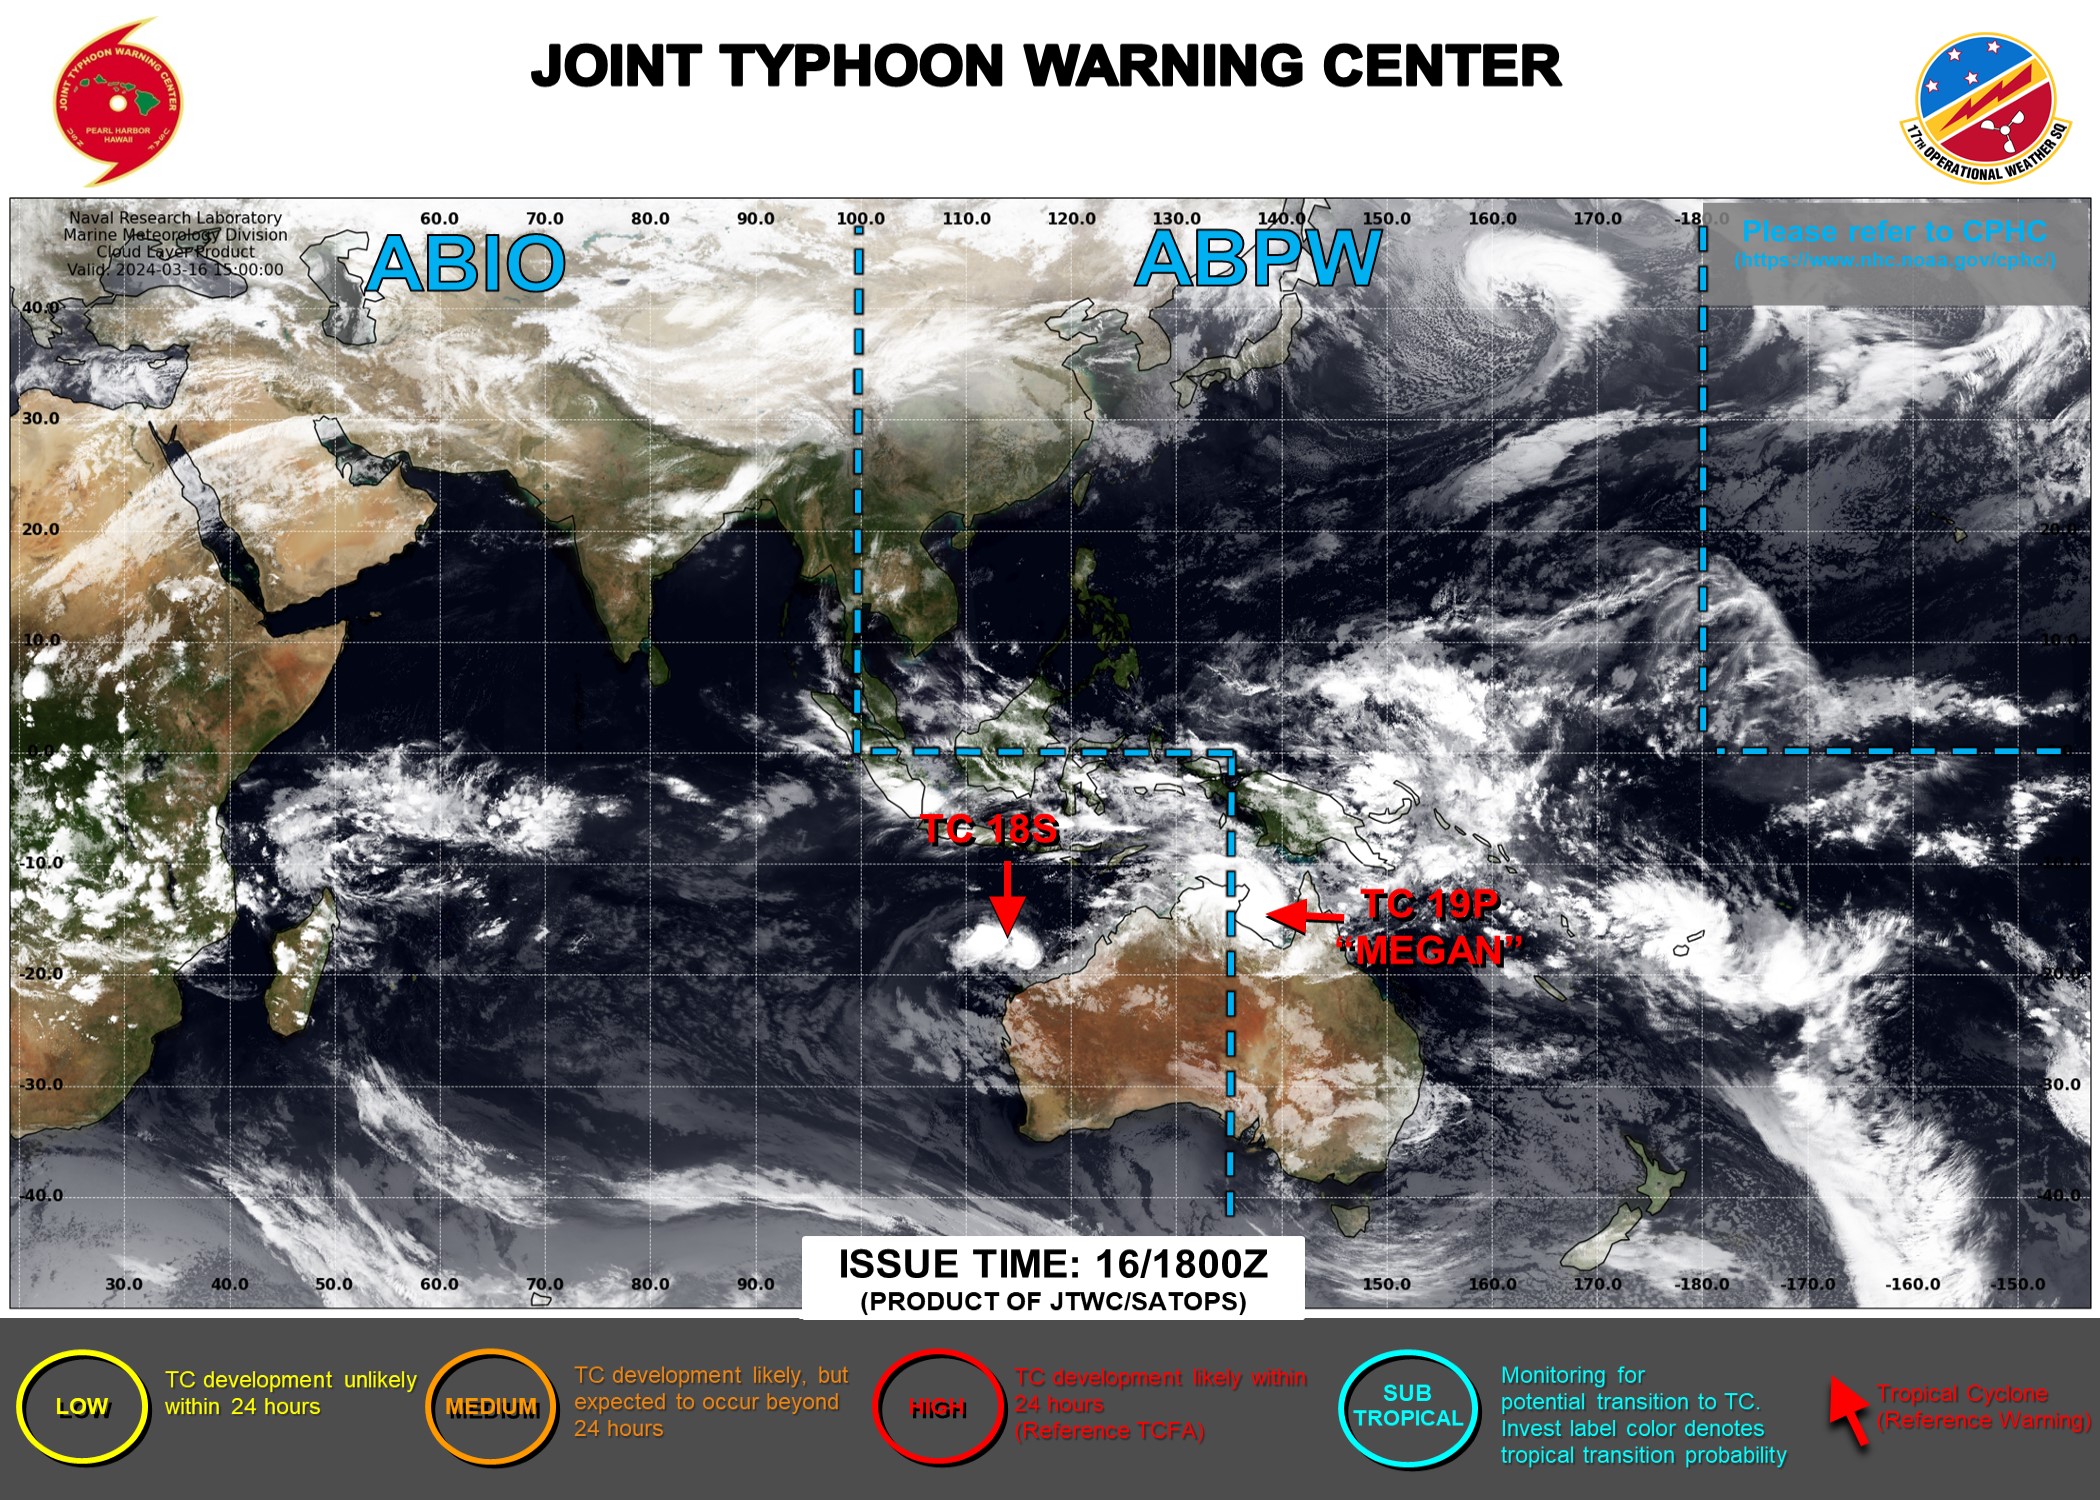 JTWC IS ISSUING 6HOURLY WARNINGS AND 3HOURLY SATELLITE BULLETINS ON TC 19P AND ON TC 18S